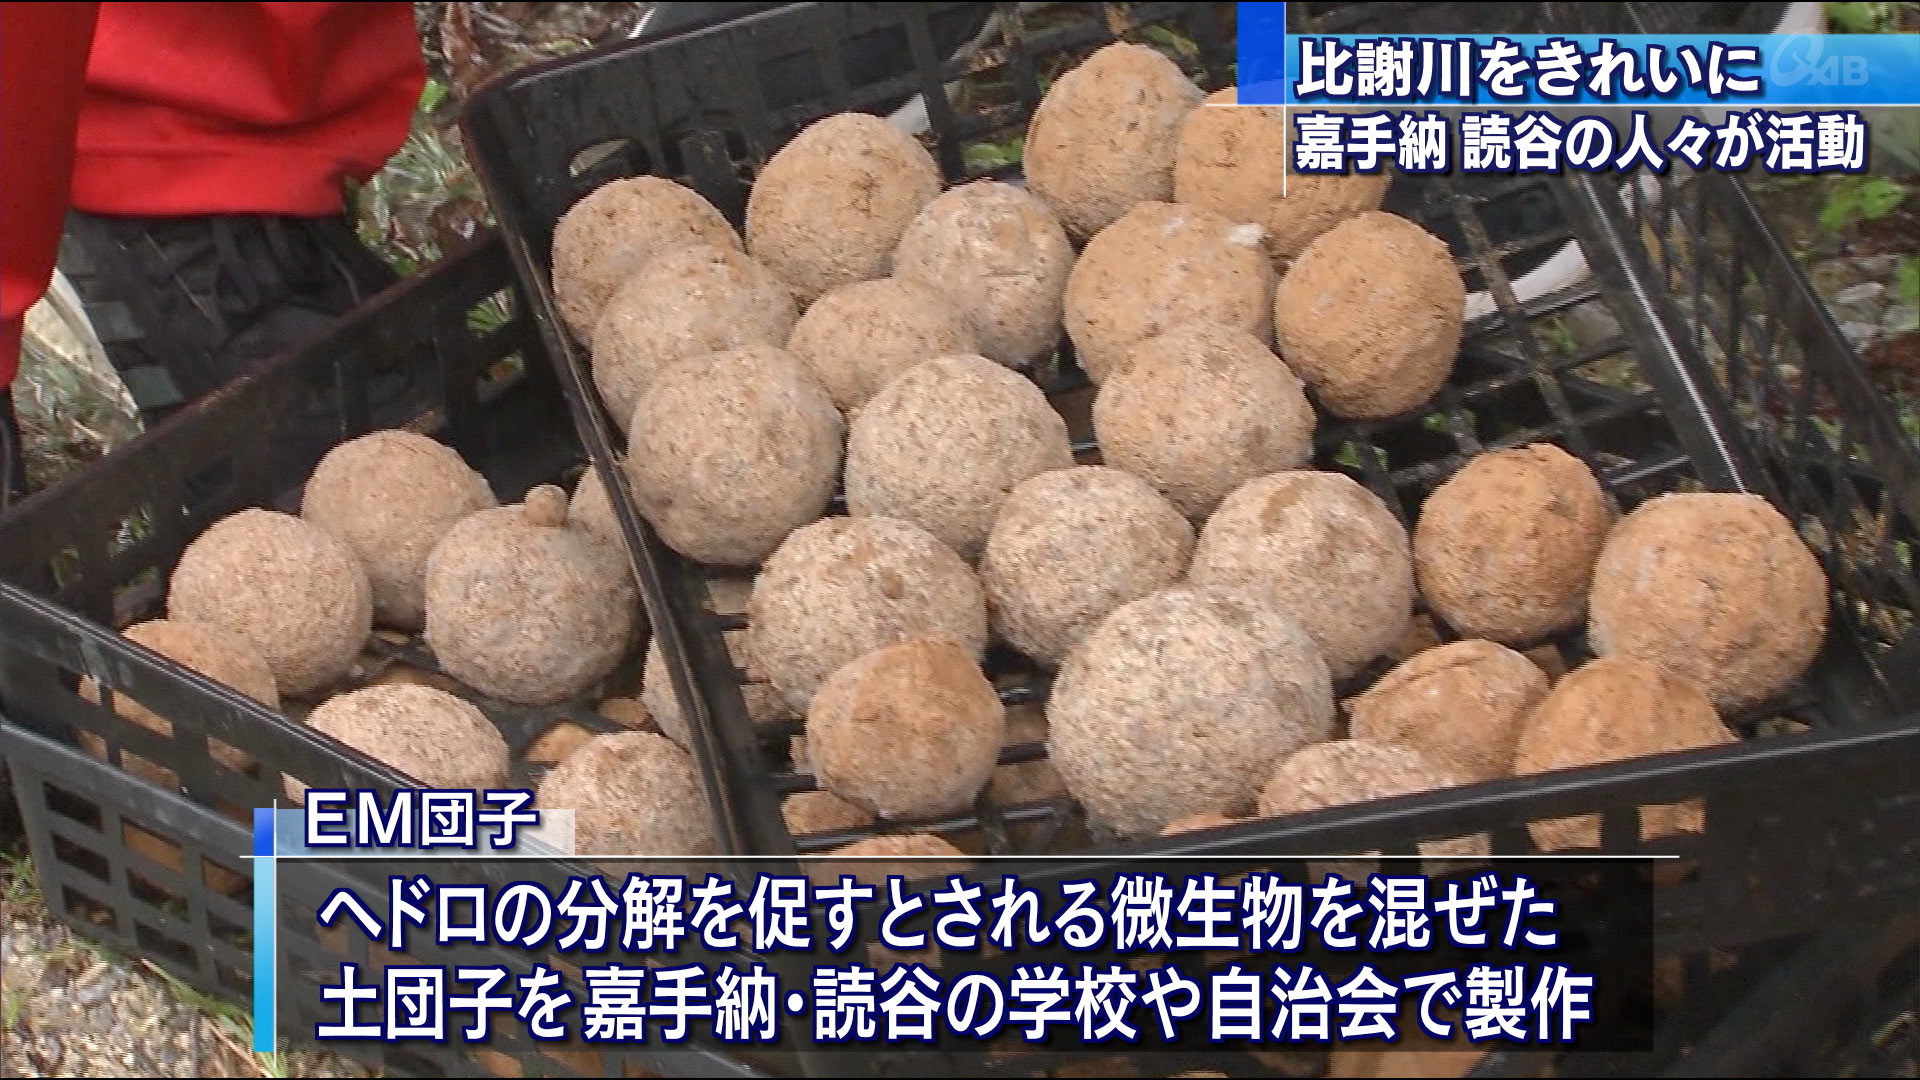 EM Mudball Event to purify a local river in Okinawa